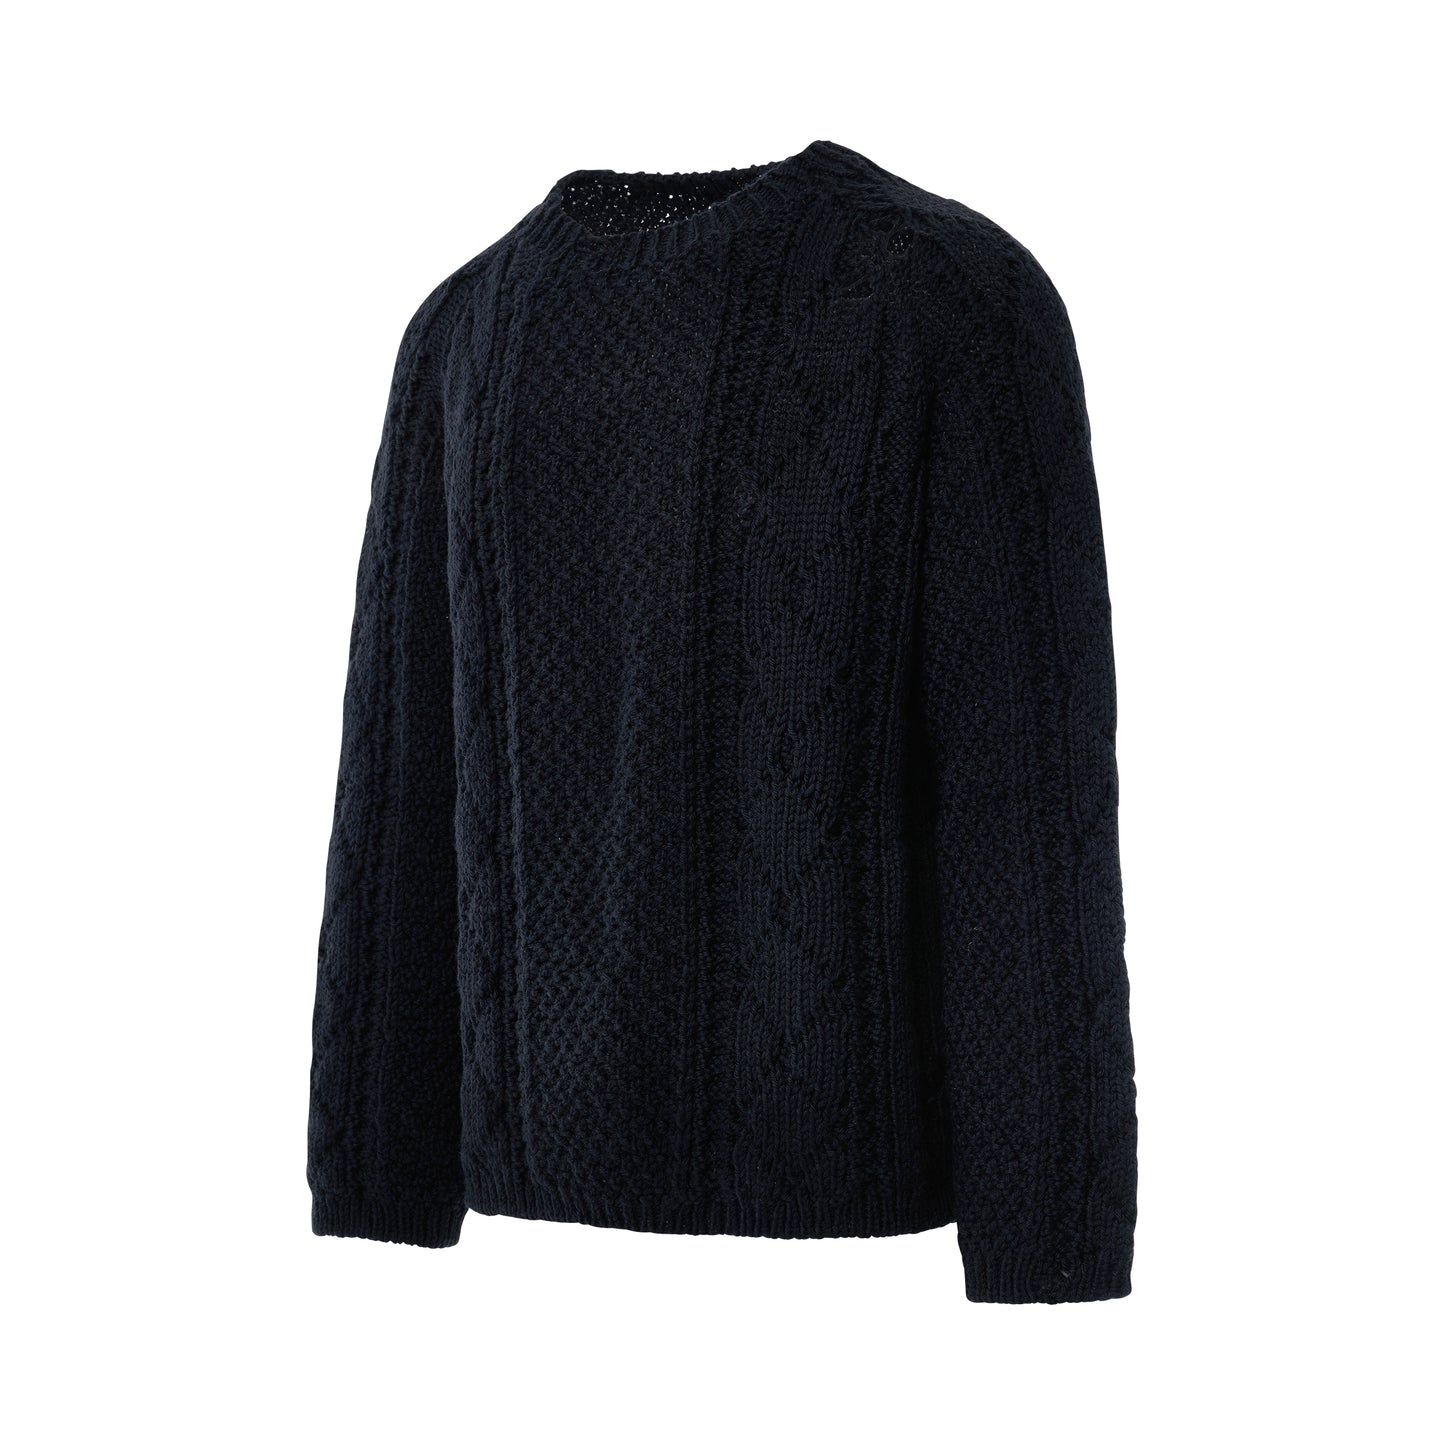 Distressed Panel Knit Sweater in Navy